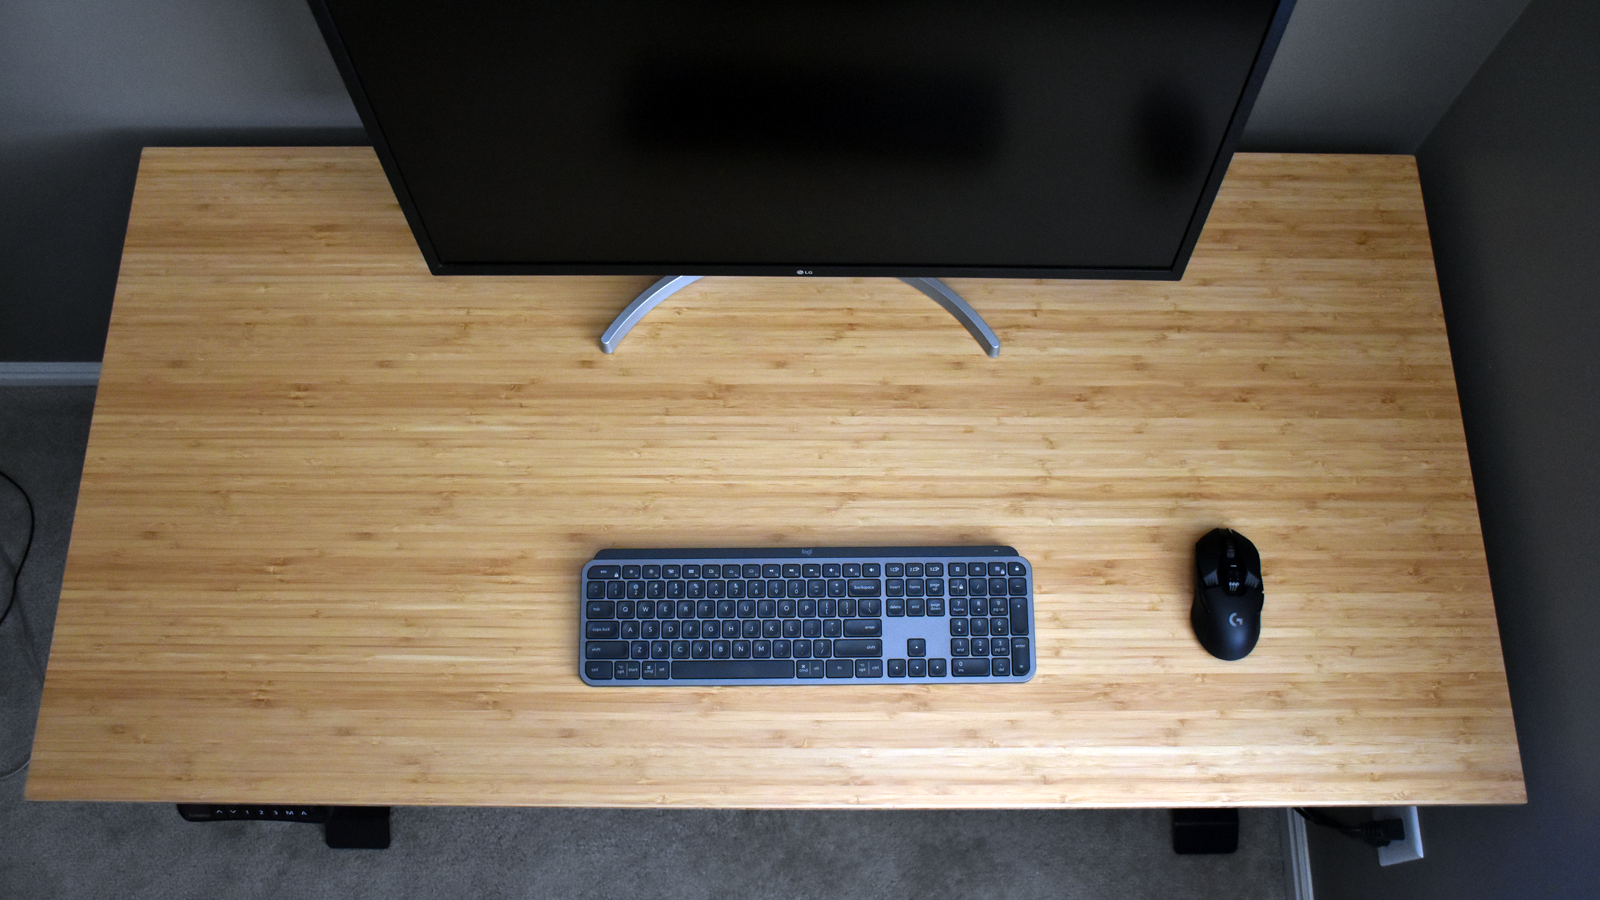 Top-down view of the desk with just a keyboard, monitor, and mouse on it